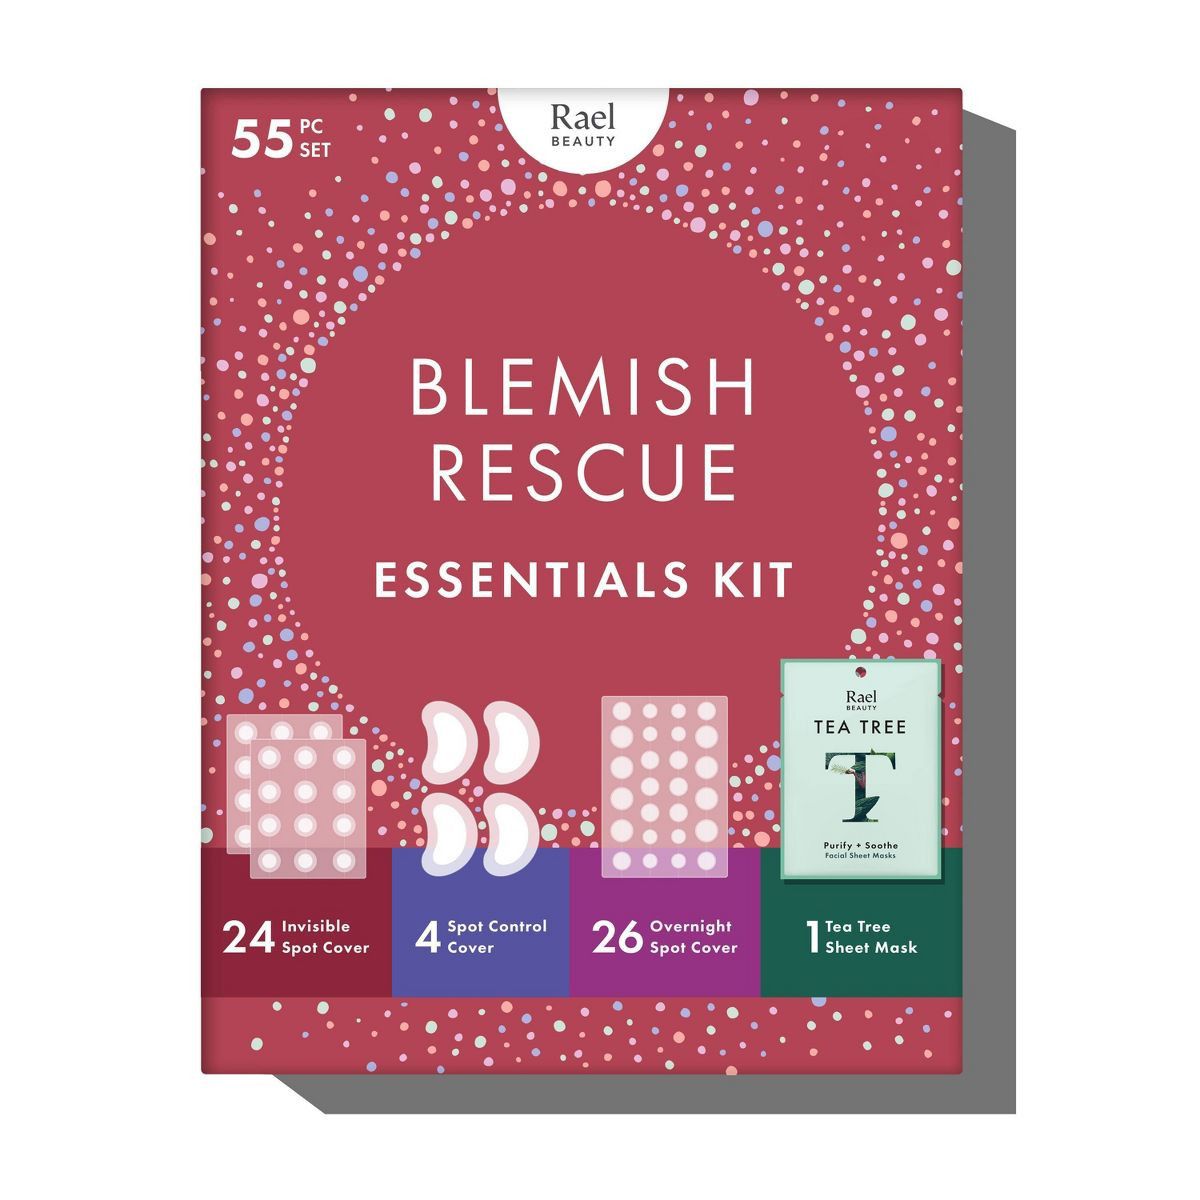 Rael Beauty Blemish Rescue Essentials Limited Edition Gift Set - 55pc | Target